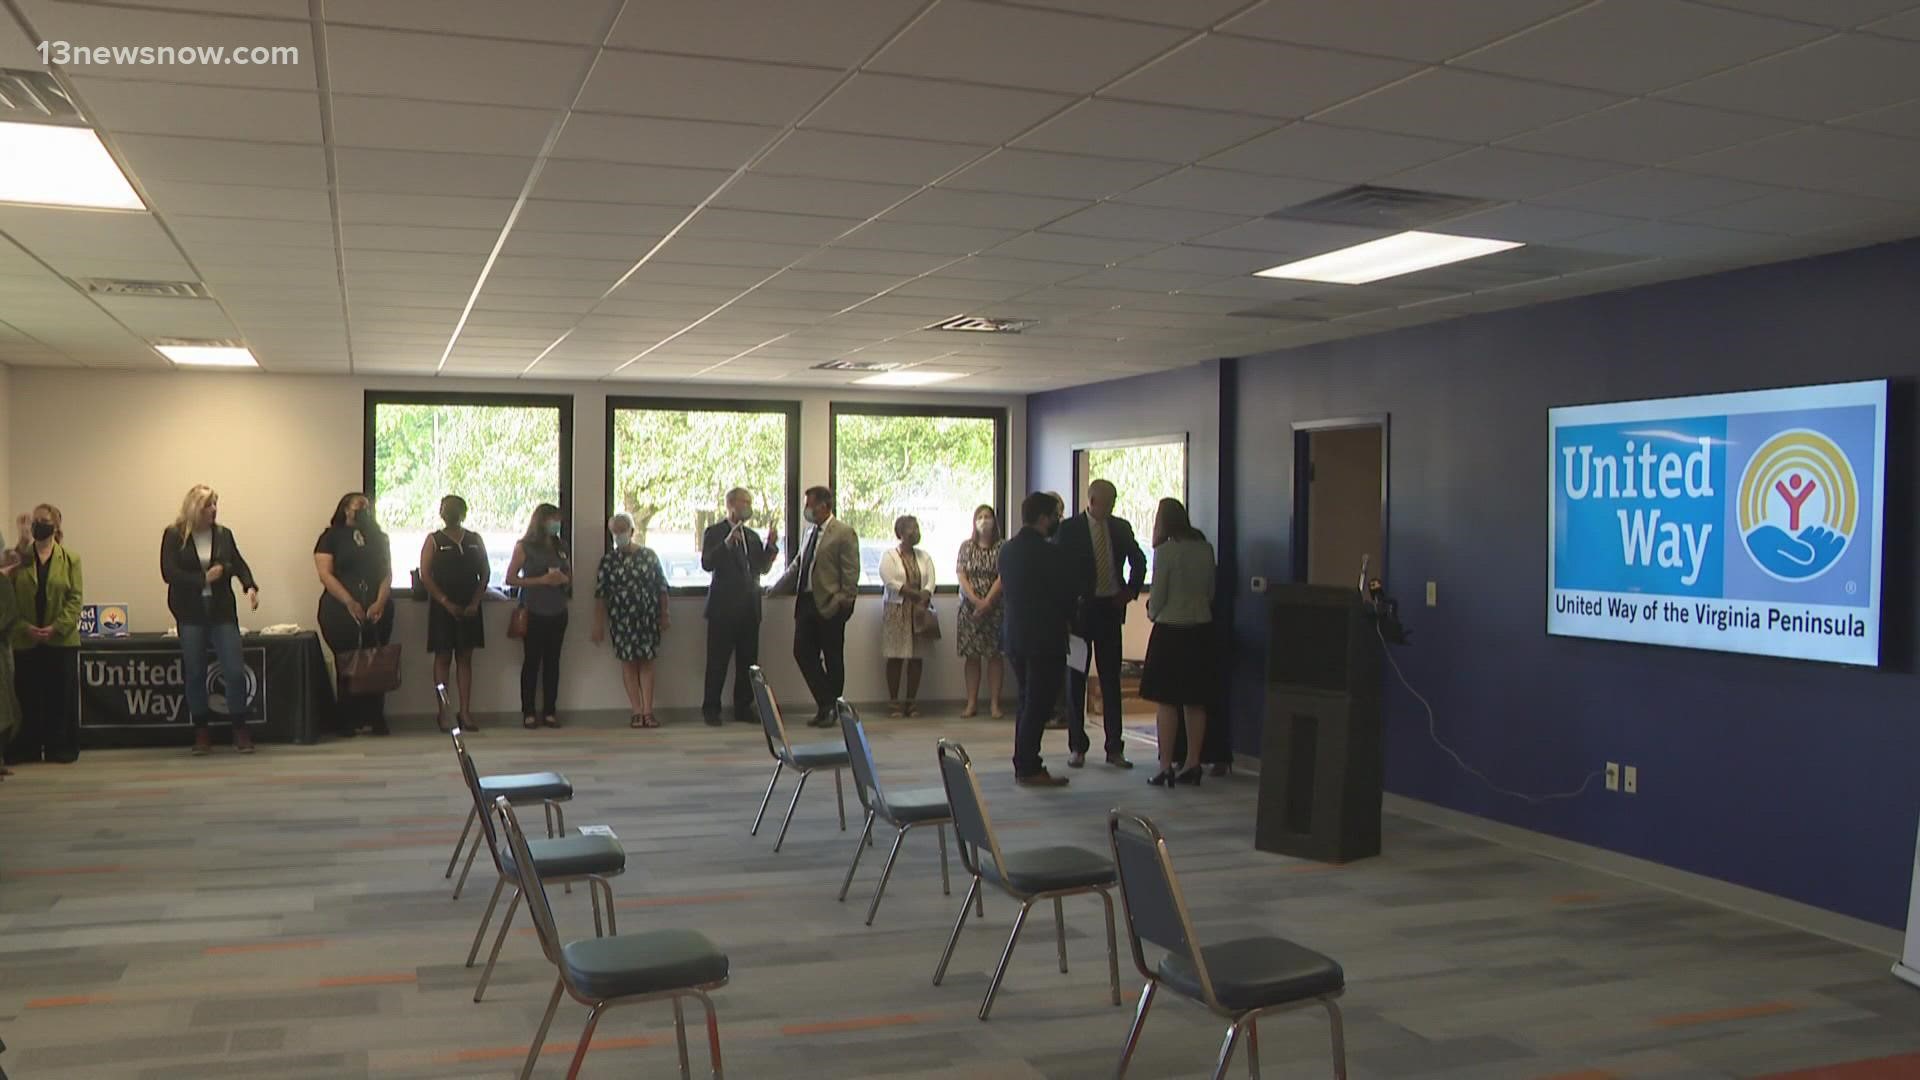 United Way of the Virginia Peninsula announced it is opening a $1 million facility in Yorktown, 'United We CAN.'